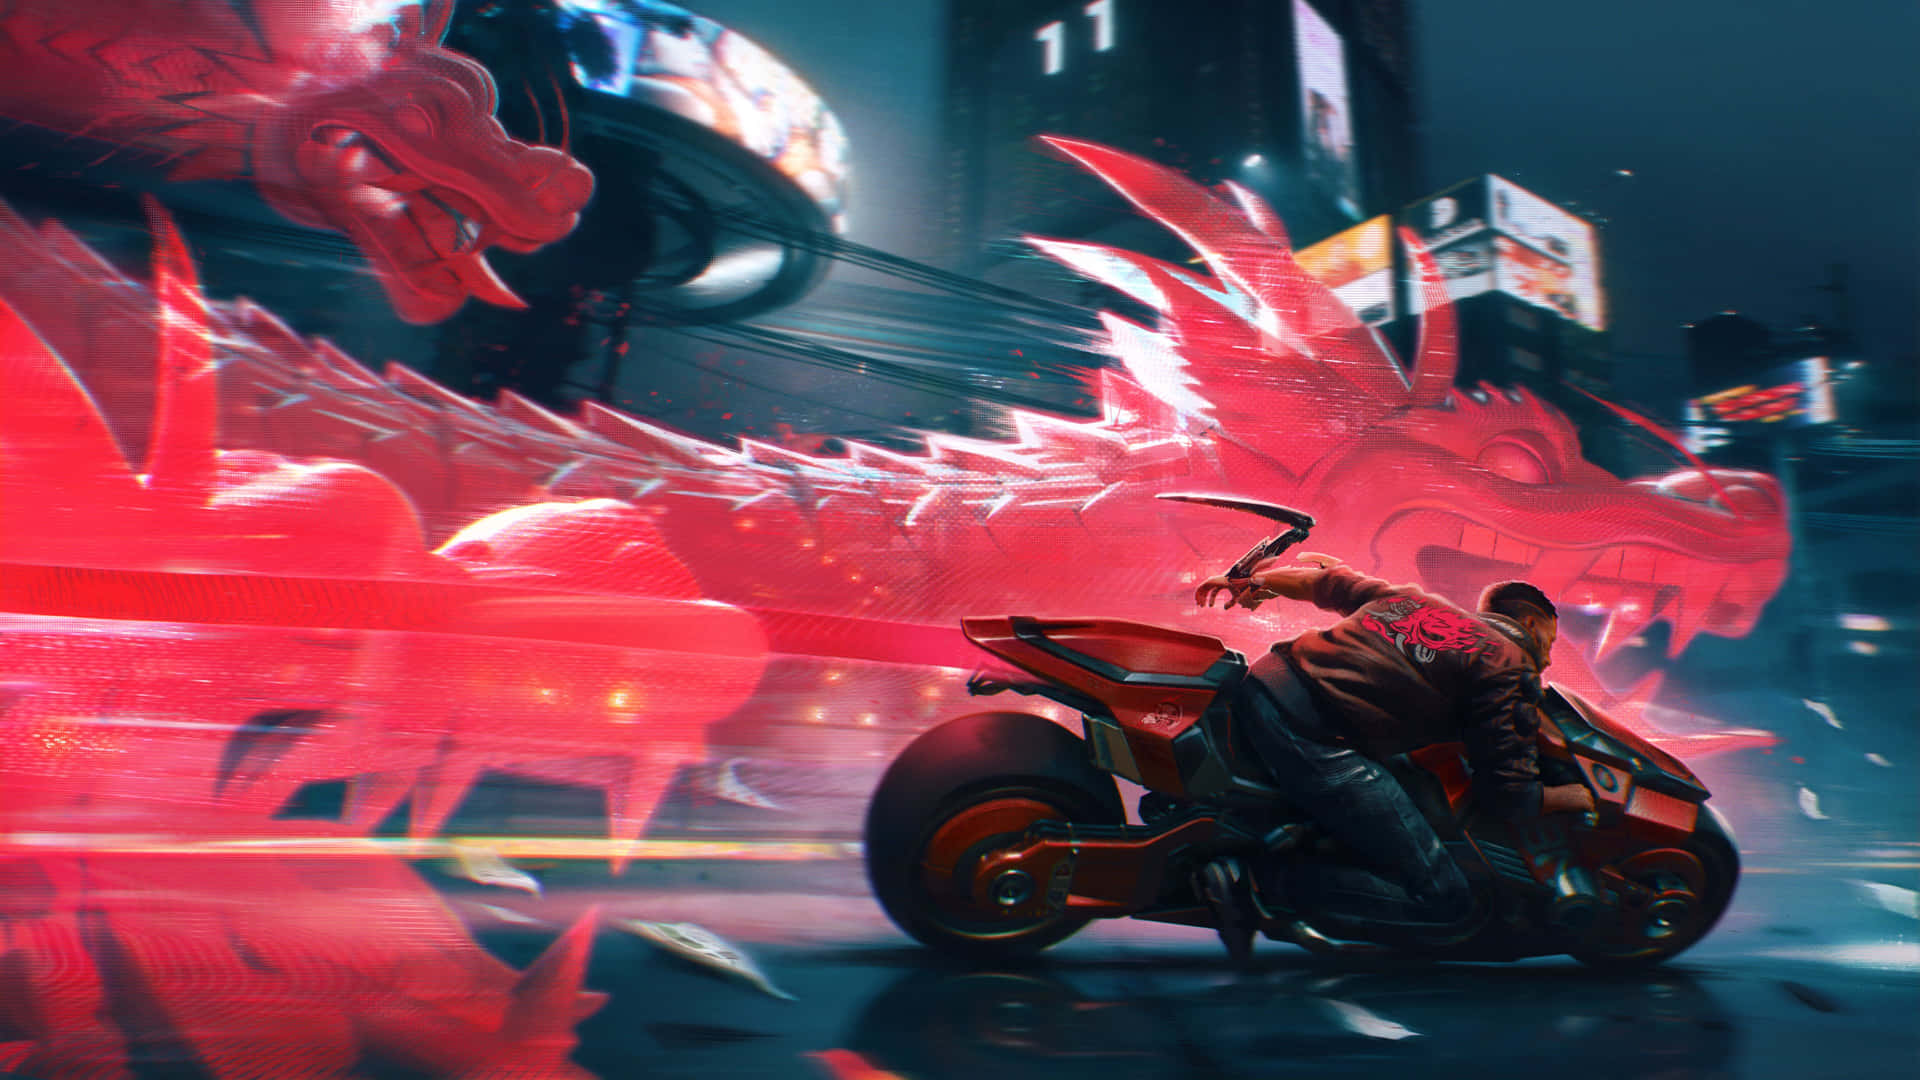 "Explore the vibrant and mysterious world of Cyberpunk". Wallpaper